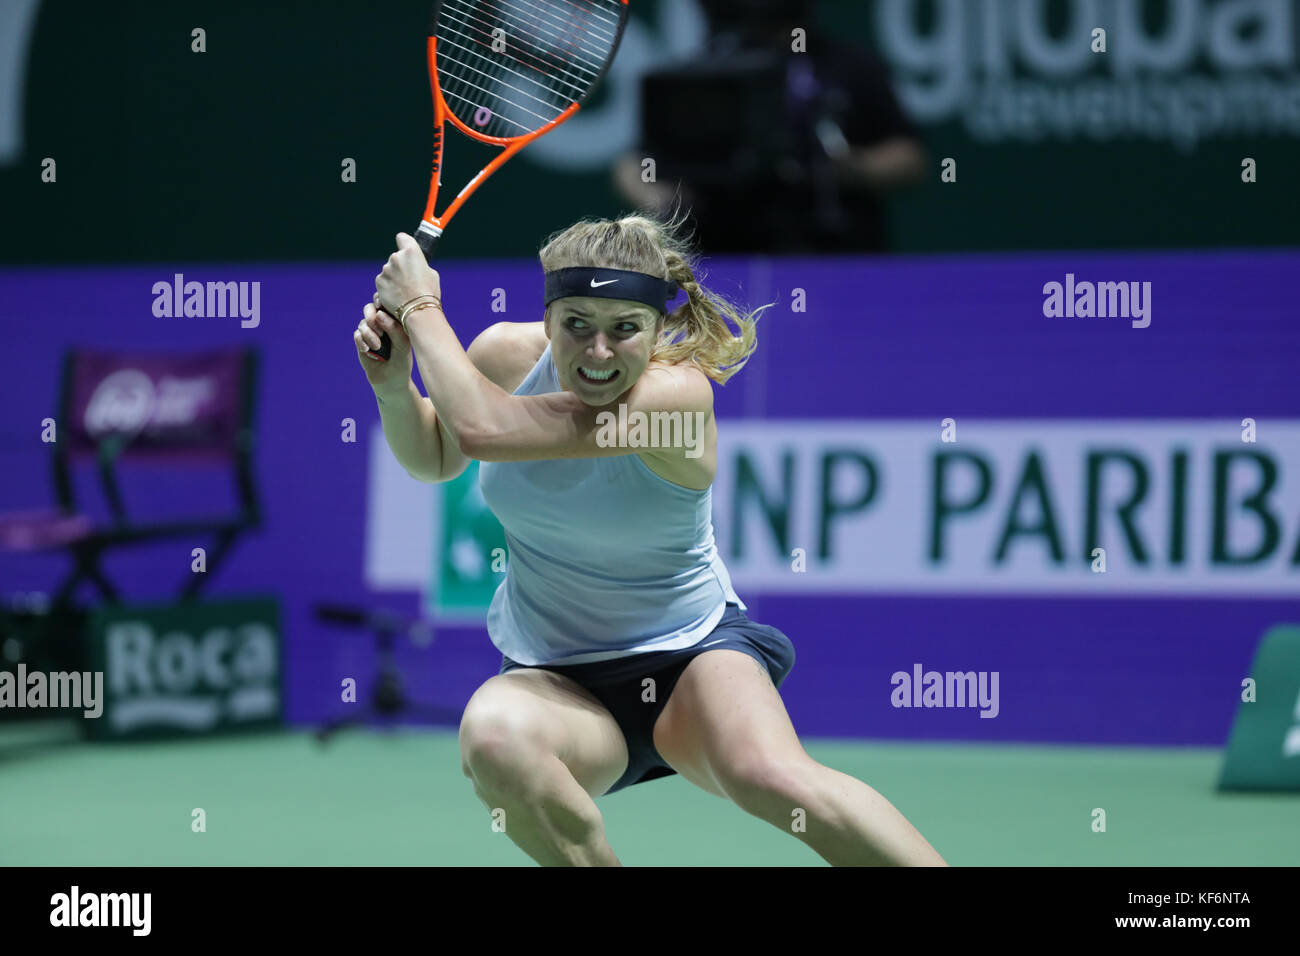 Singapore, Singapore. 25th Oct, 2017. Ukrainian tennis player Elina  Svitolina is in action during her first round robin match of the WTA Finals  vs French tennis player Caroline Garcia on Oct 25,